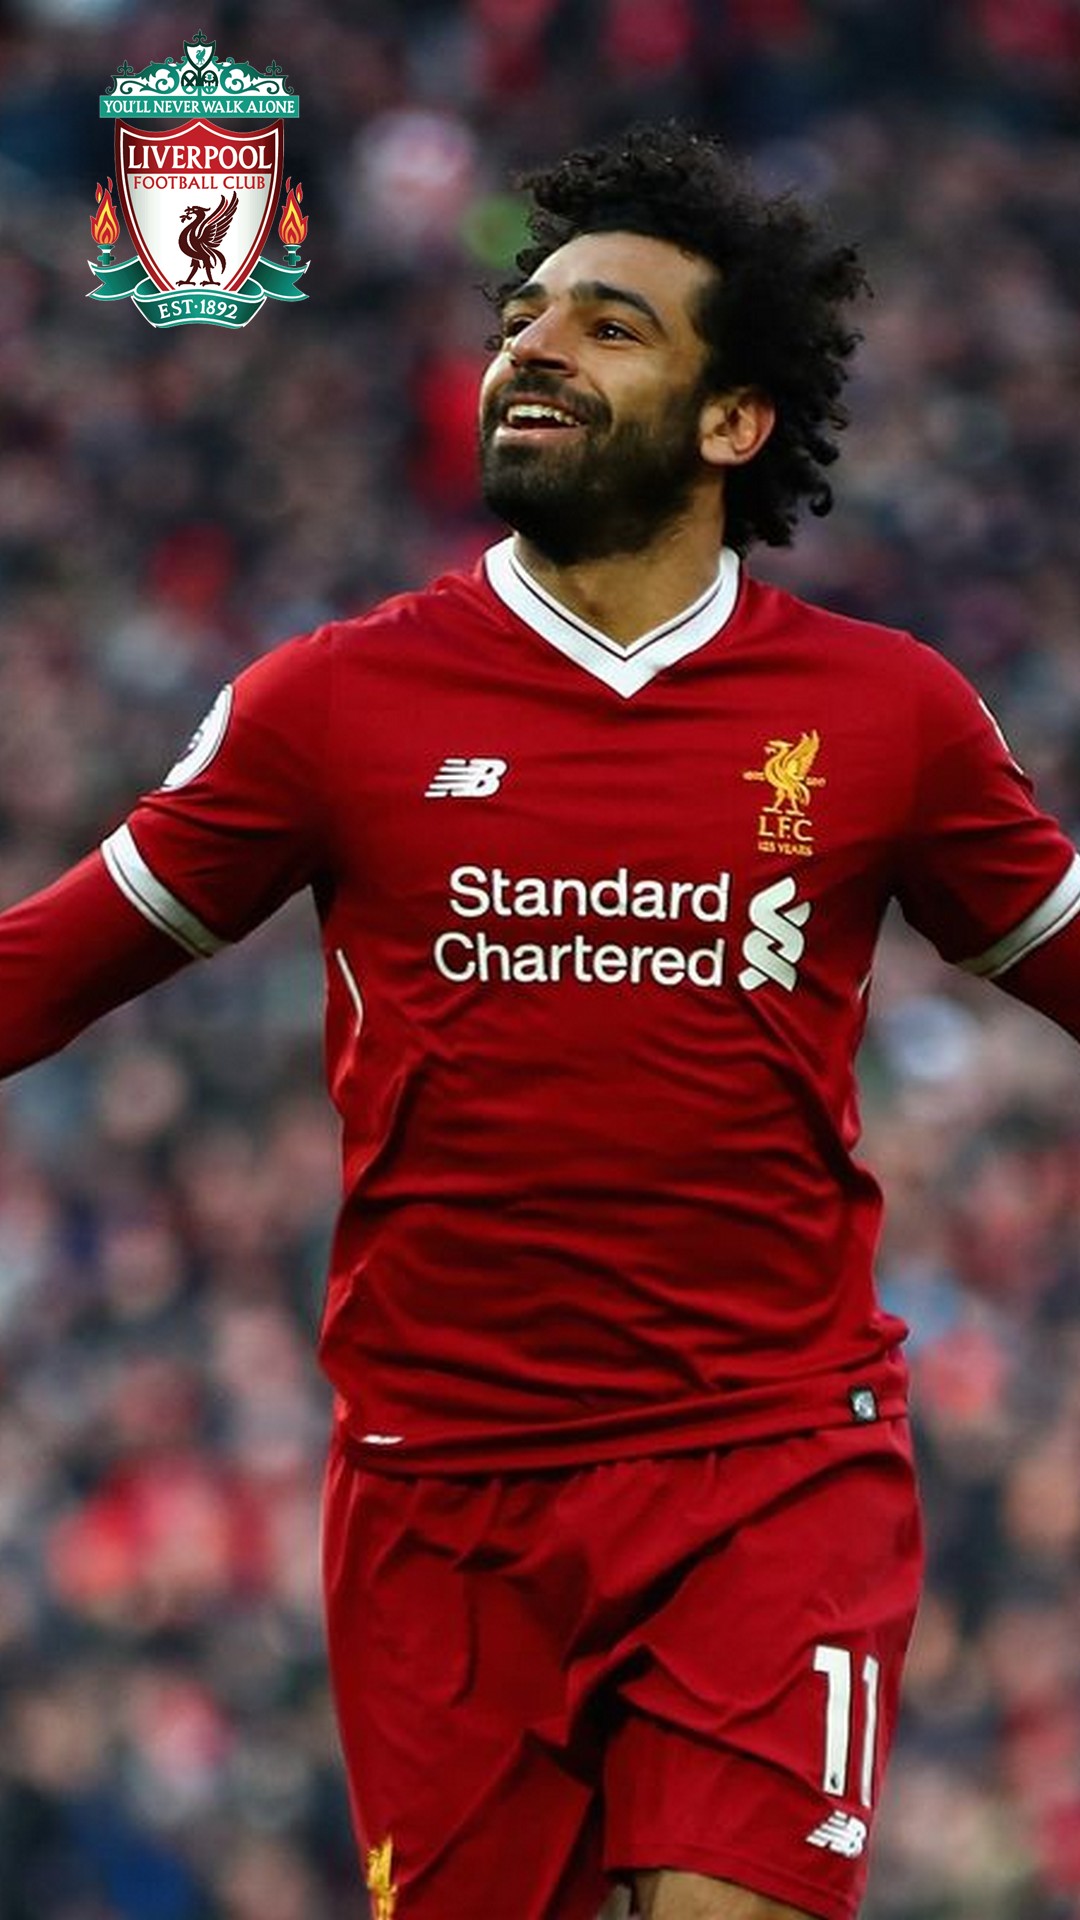 Mohamed Salah Wallpaper For iPhone with resolution 1080X1920 pixel. You can make this wallpaper for your iPhone 5, 6, 7, 8, X backgrounds, Mobile Screensaver, or iPad Lock Screen